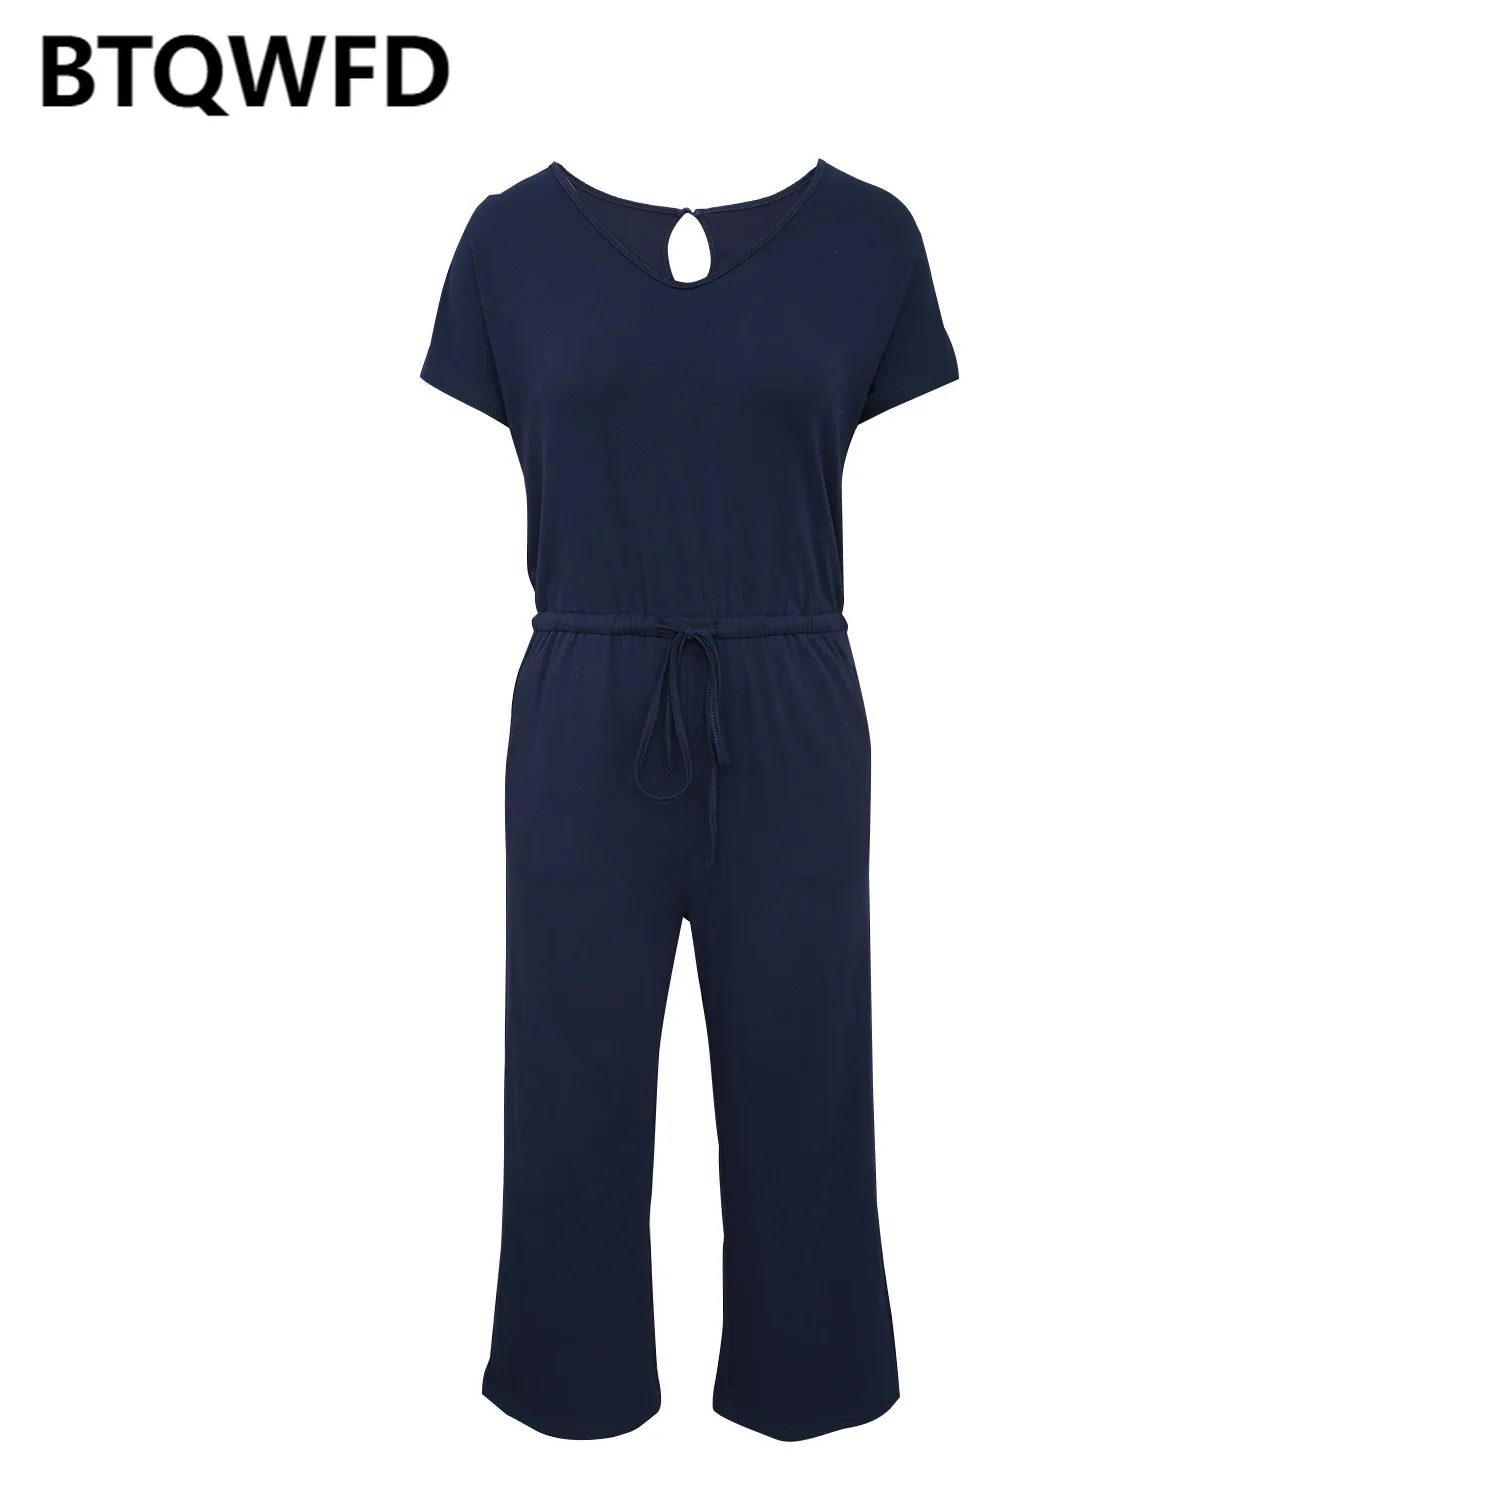 Jumpsuit Women 2022 New Romper Summer Playsuit Clothing Female Outfits Pink Knitting Short Sleeve Long Pants Fashion Green Blue